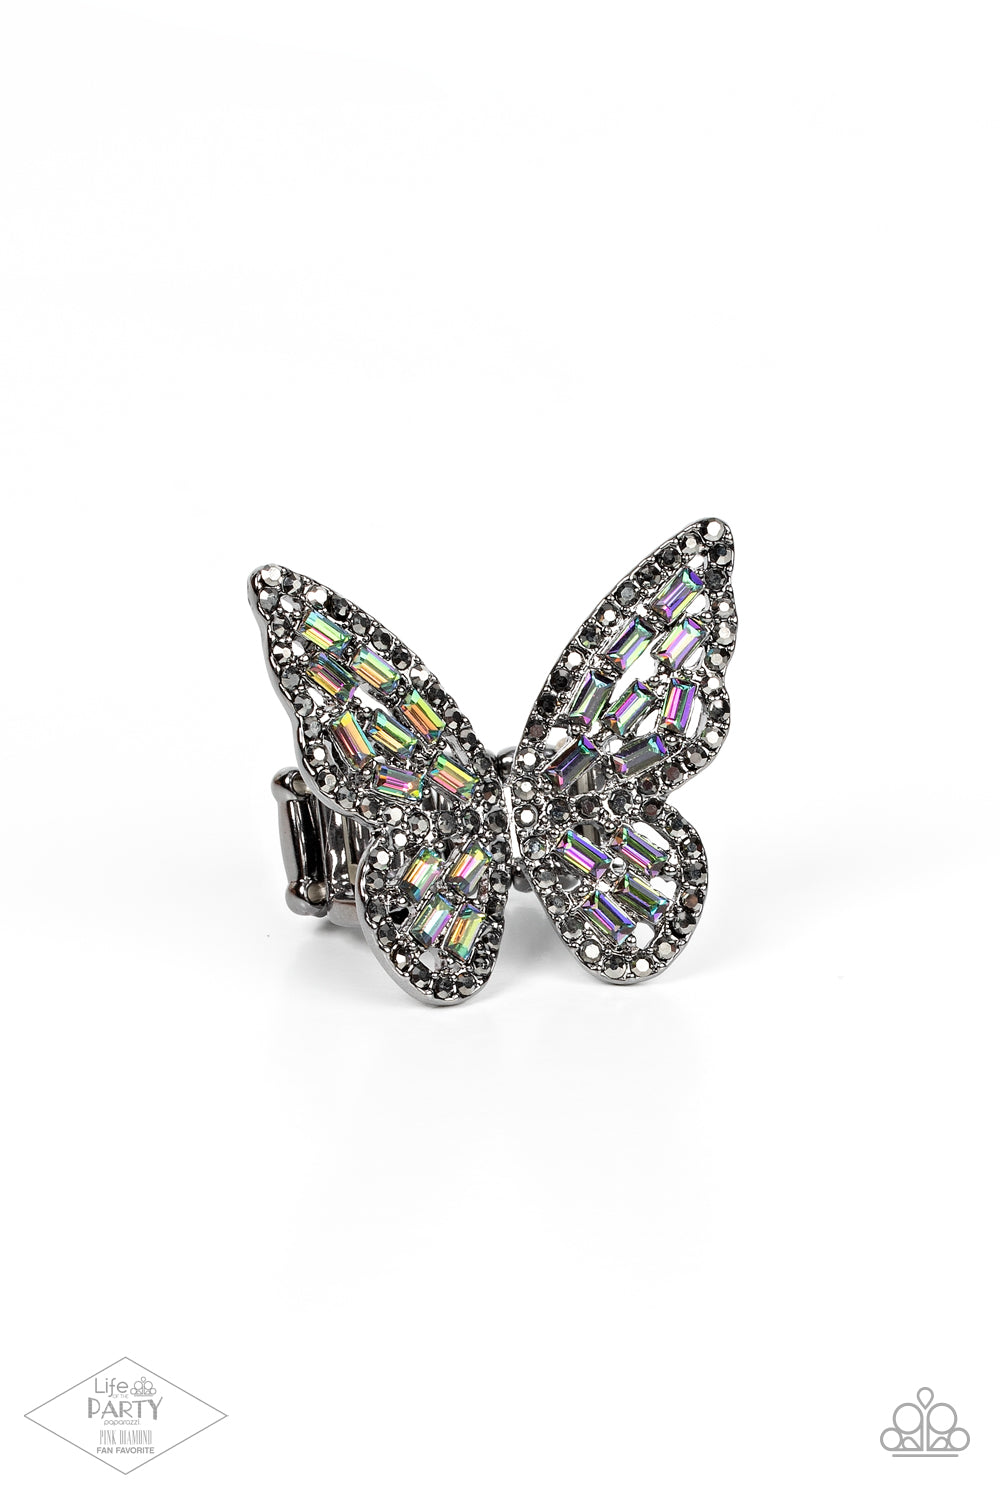 Dainty oil spill emerald-cut rhinestones are sprinkled across the gunmetal wings of a butterfly that is encrusted in dauntless hematite rhinestones for a dramatically dazzling finish. Features a stretchy band for a flexible fit.  Sold as one individual ring.